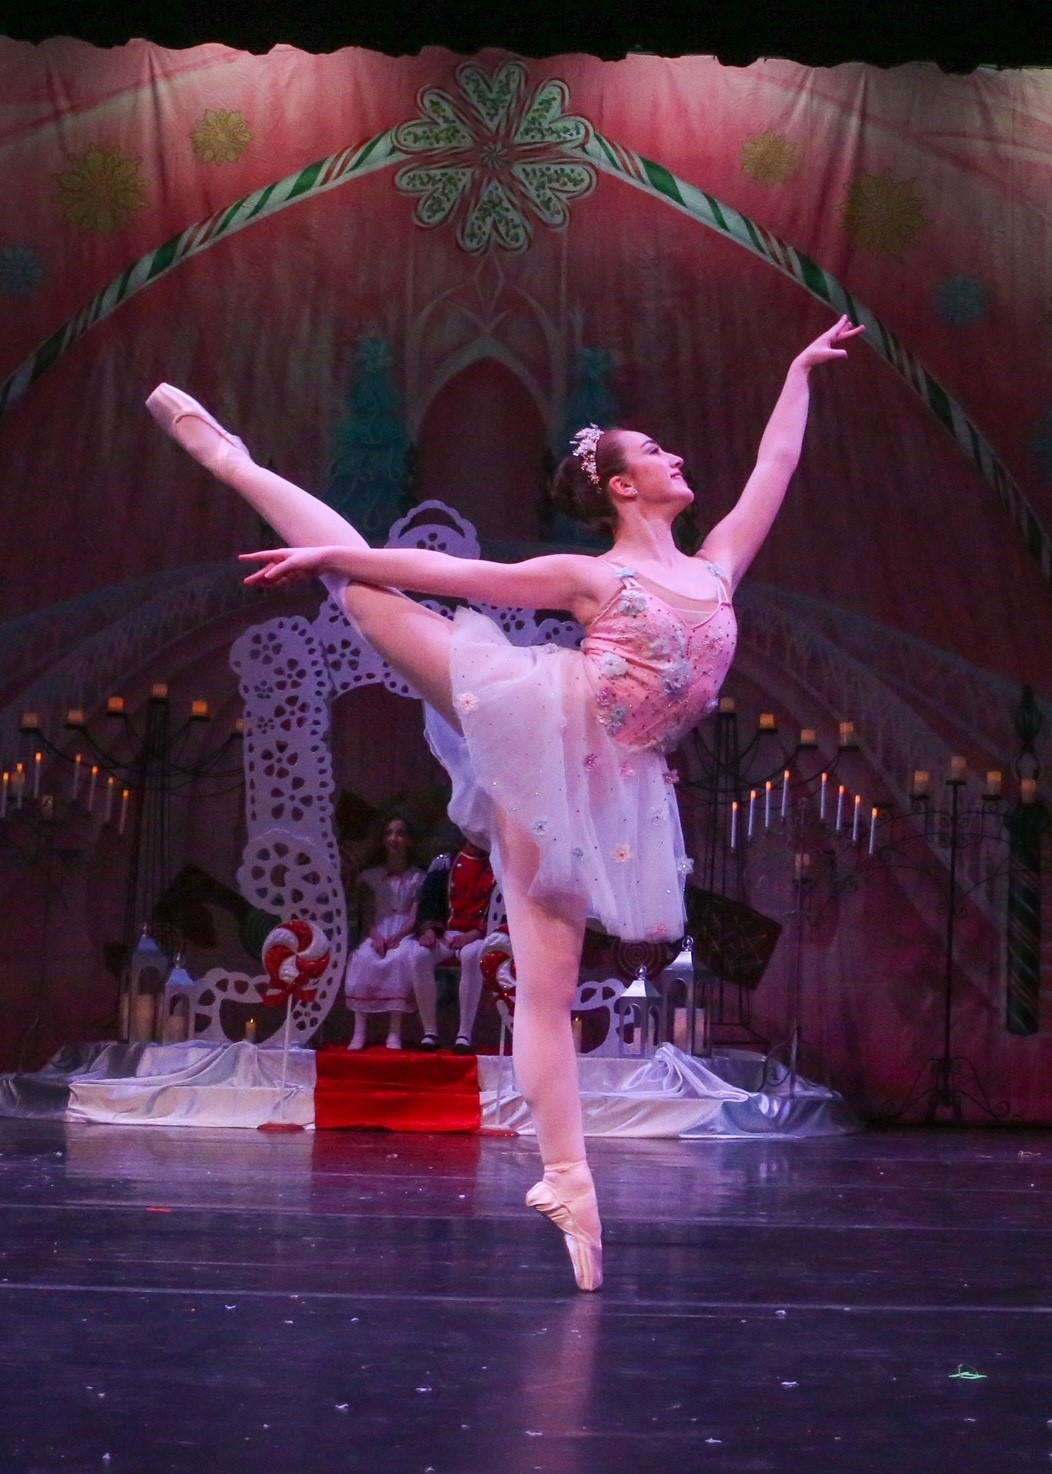 teenage girl in ballet costume with leg in air